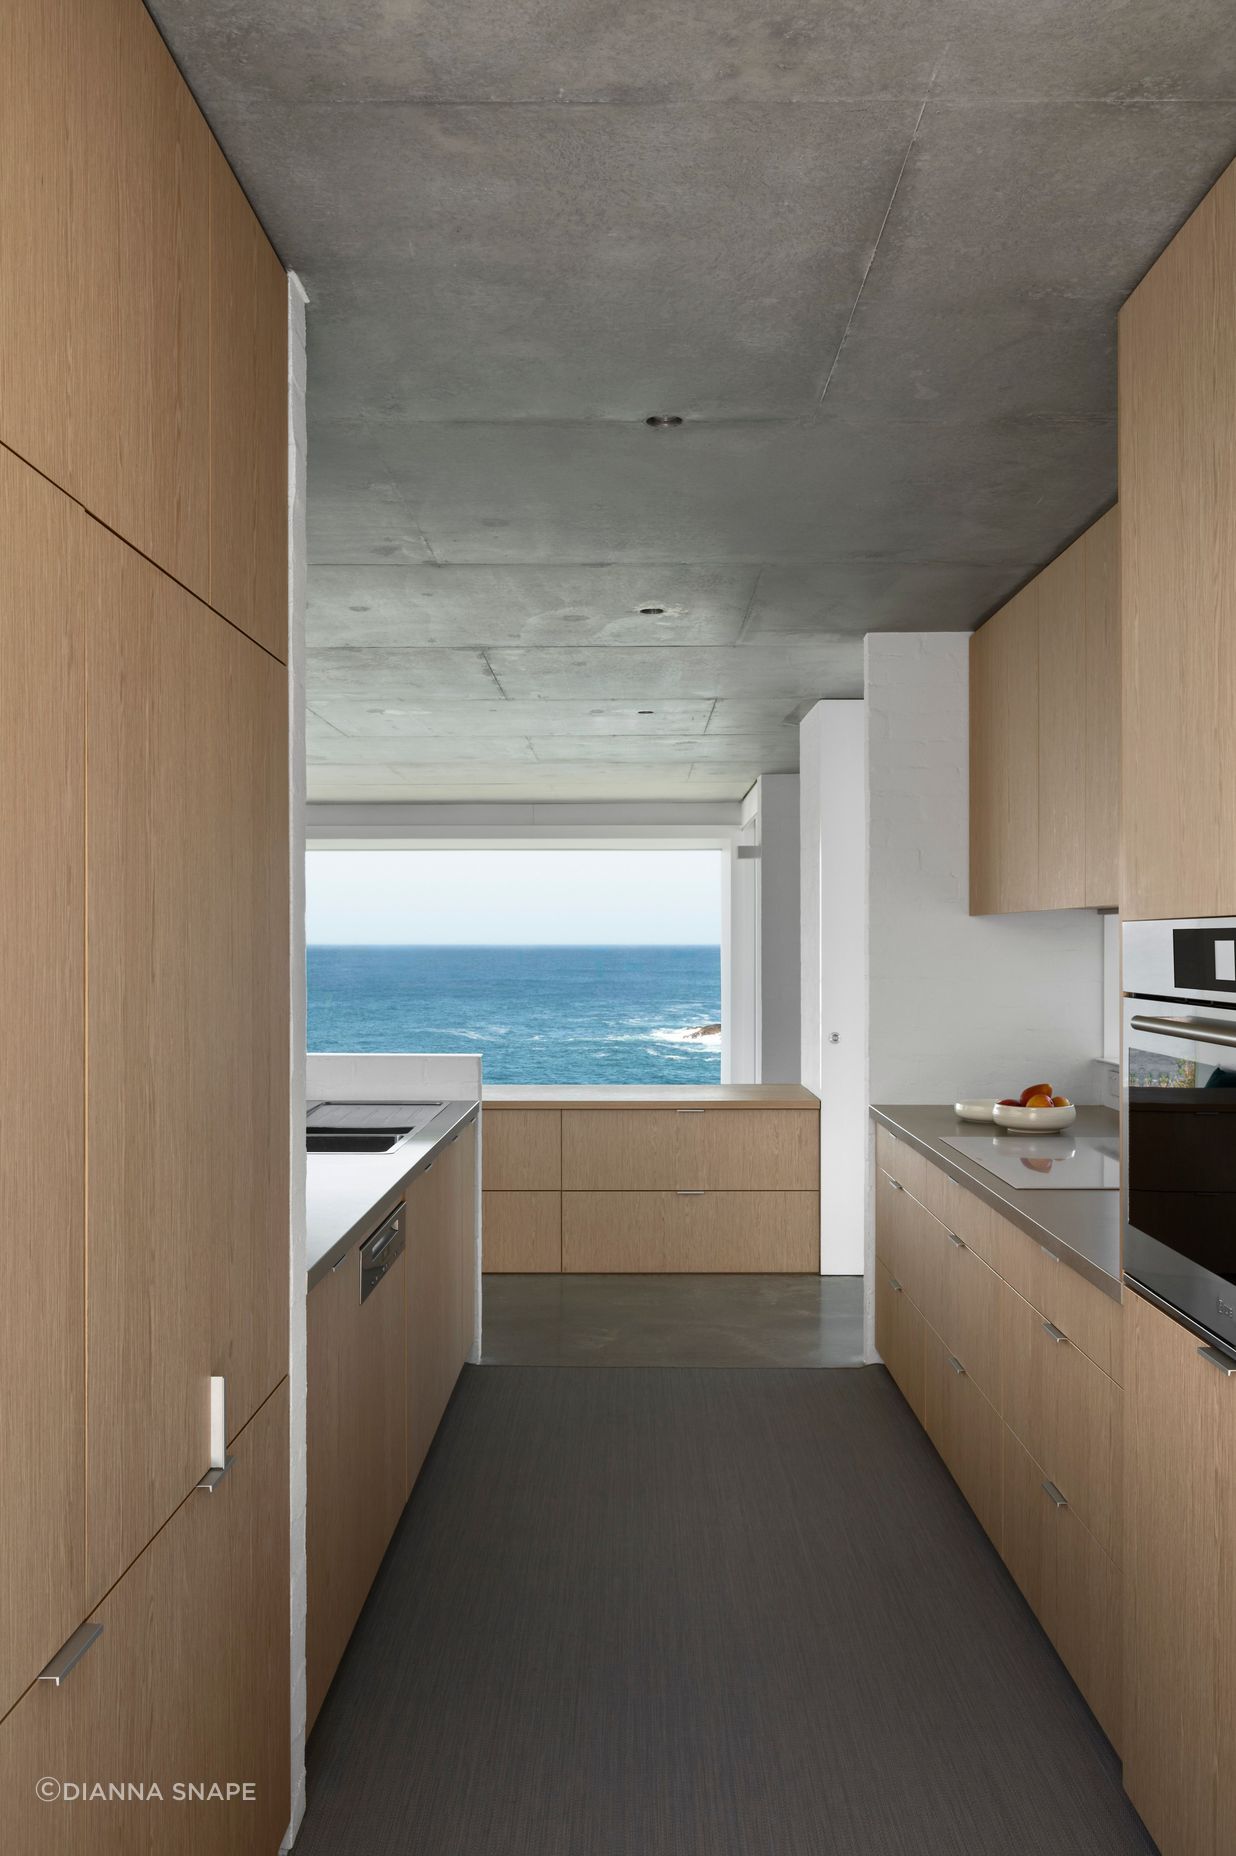 The simplicity of the galley-style kitchen promotes a sense of spaciousness and connection with the view.